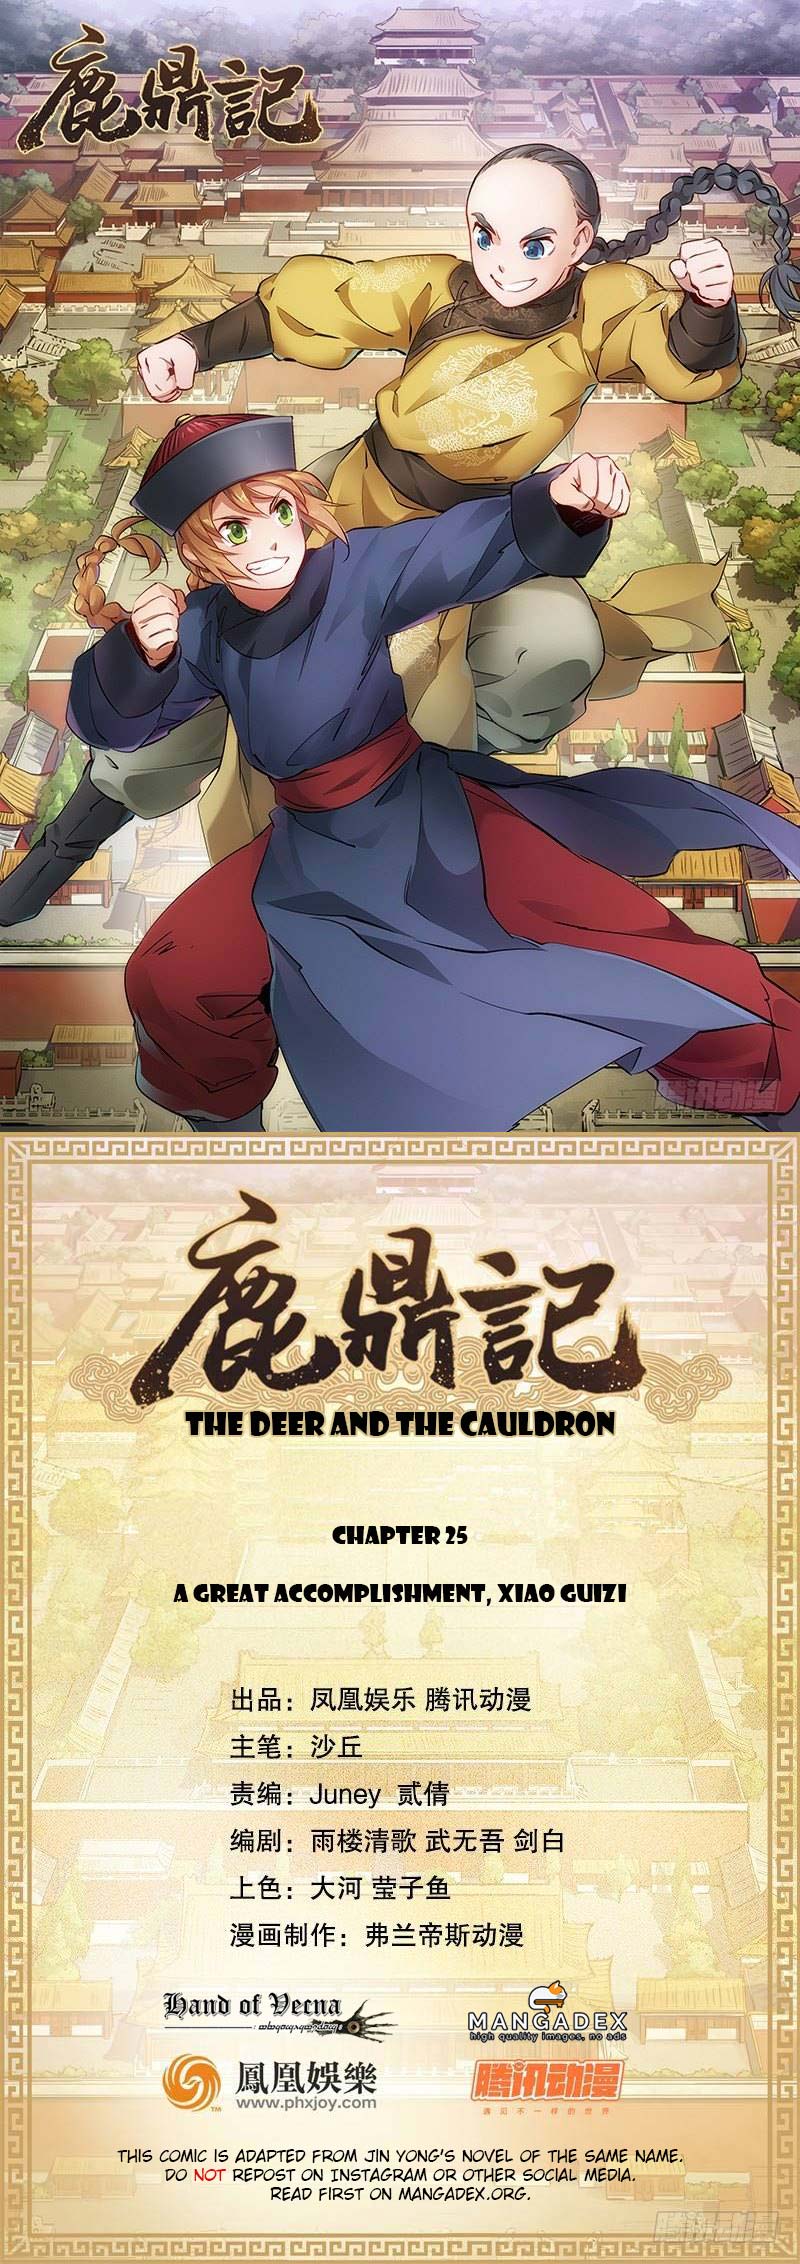 The Deer And The Cauldron Chapter 25: A Great Accomplishment, Xiao Guizi - Picture 1